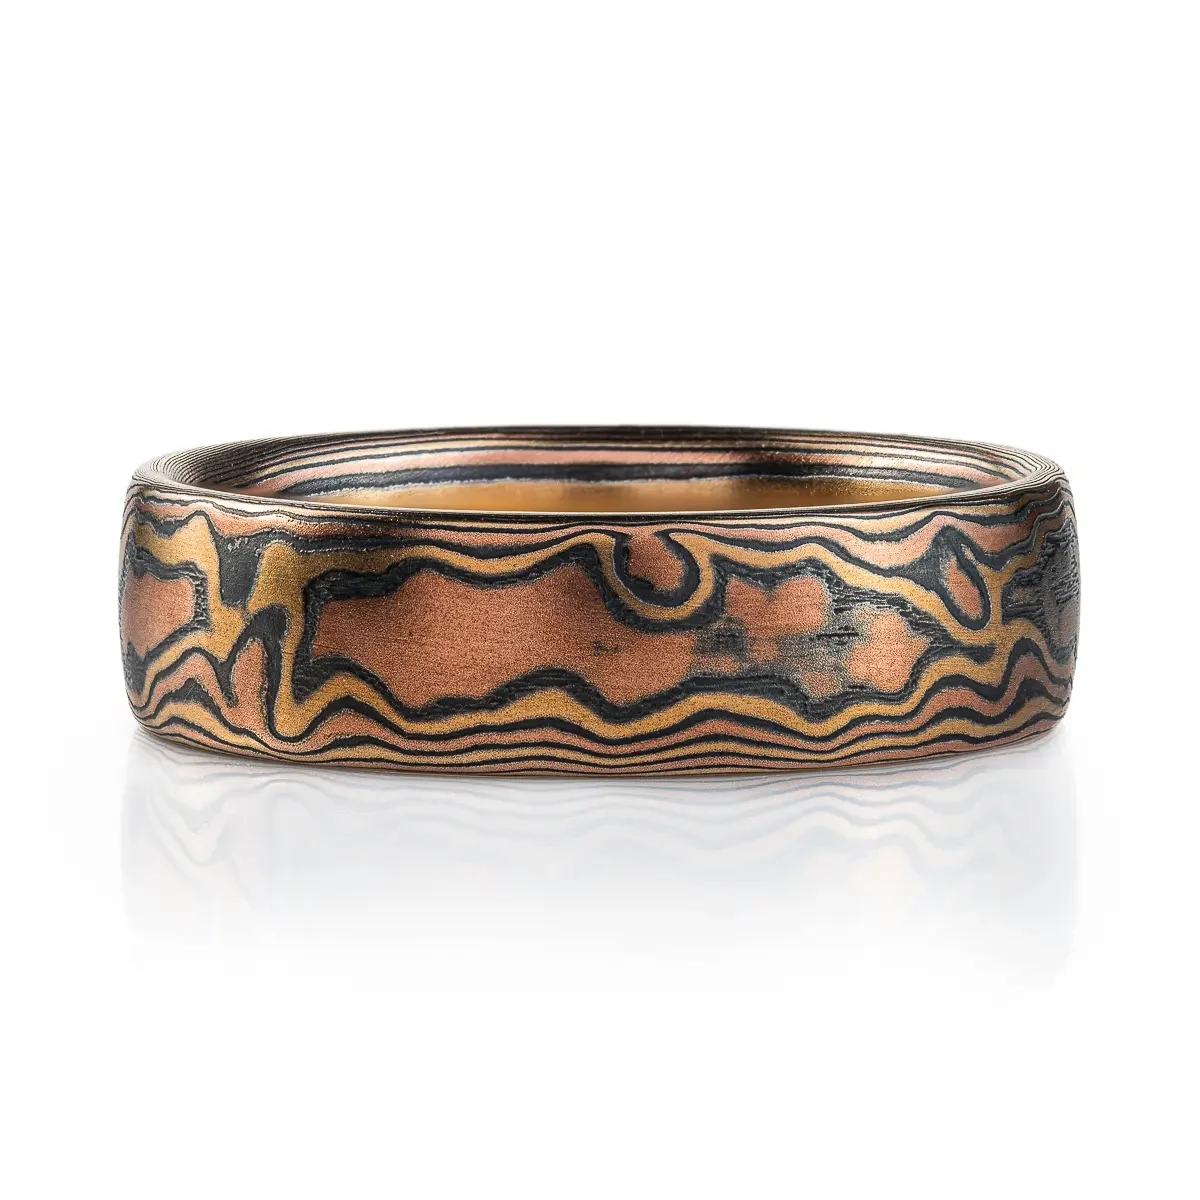 mokume gane woodgrain style patterned ring, made with red gold, yellow gold and oxidized silver